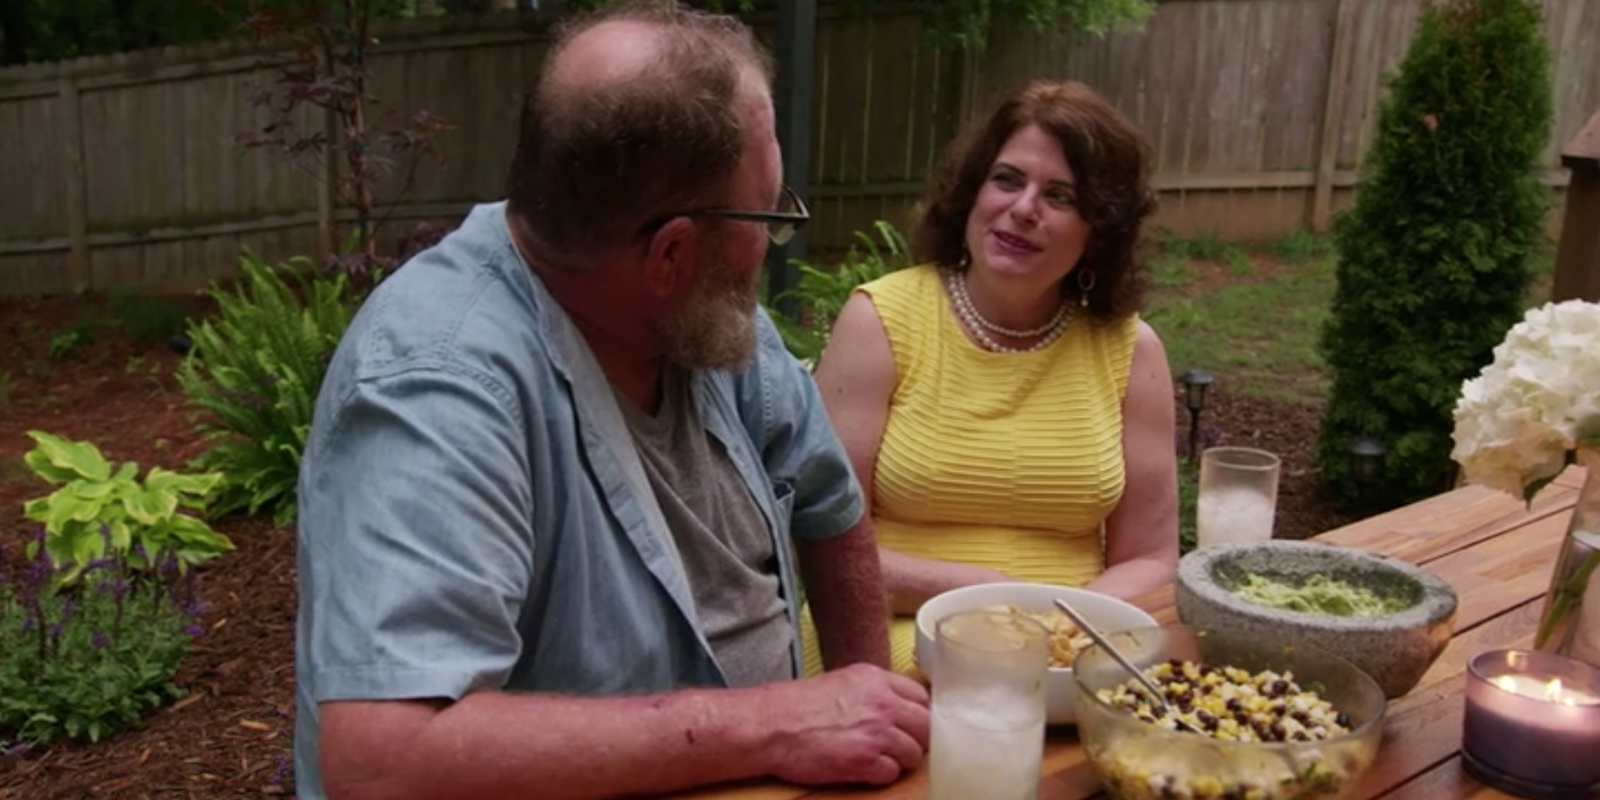 Tom and Abby sit at a picnic table, smiling at each other